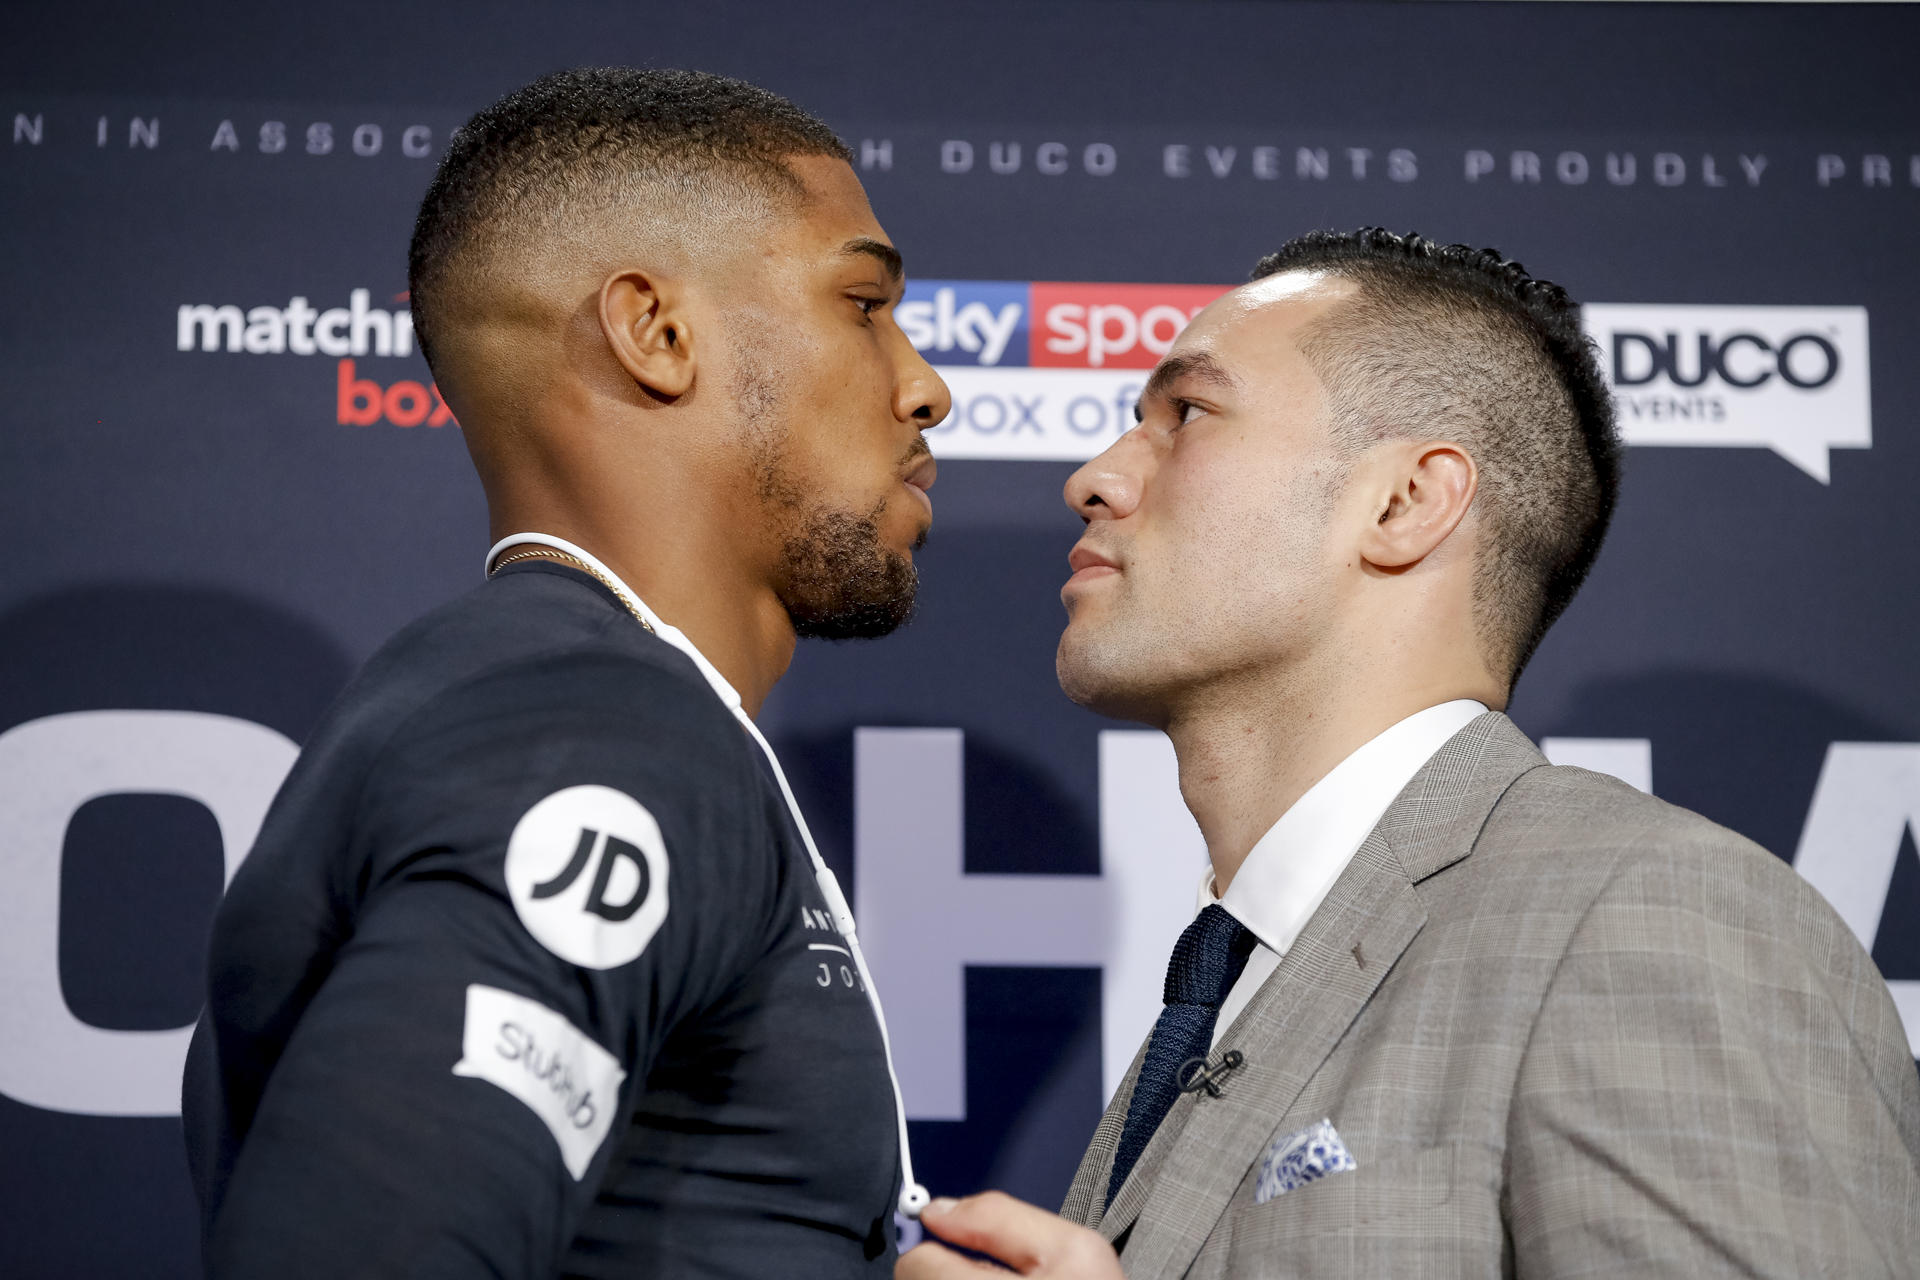 Joshua-Parker final press conference quotes